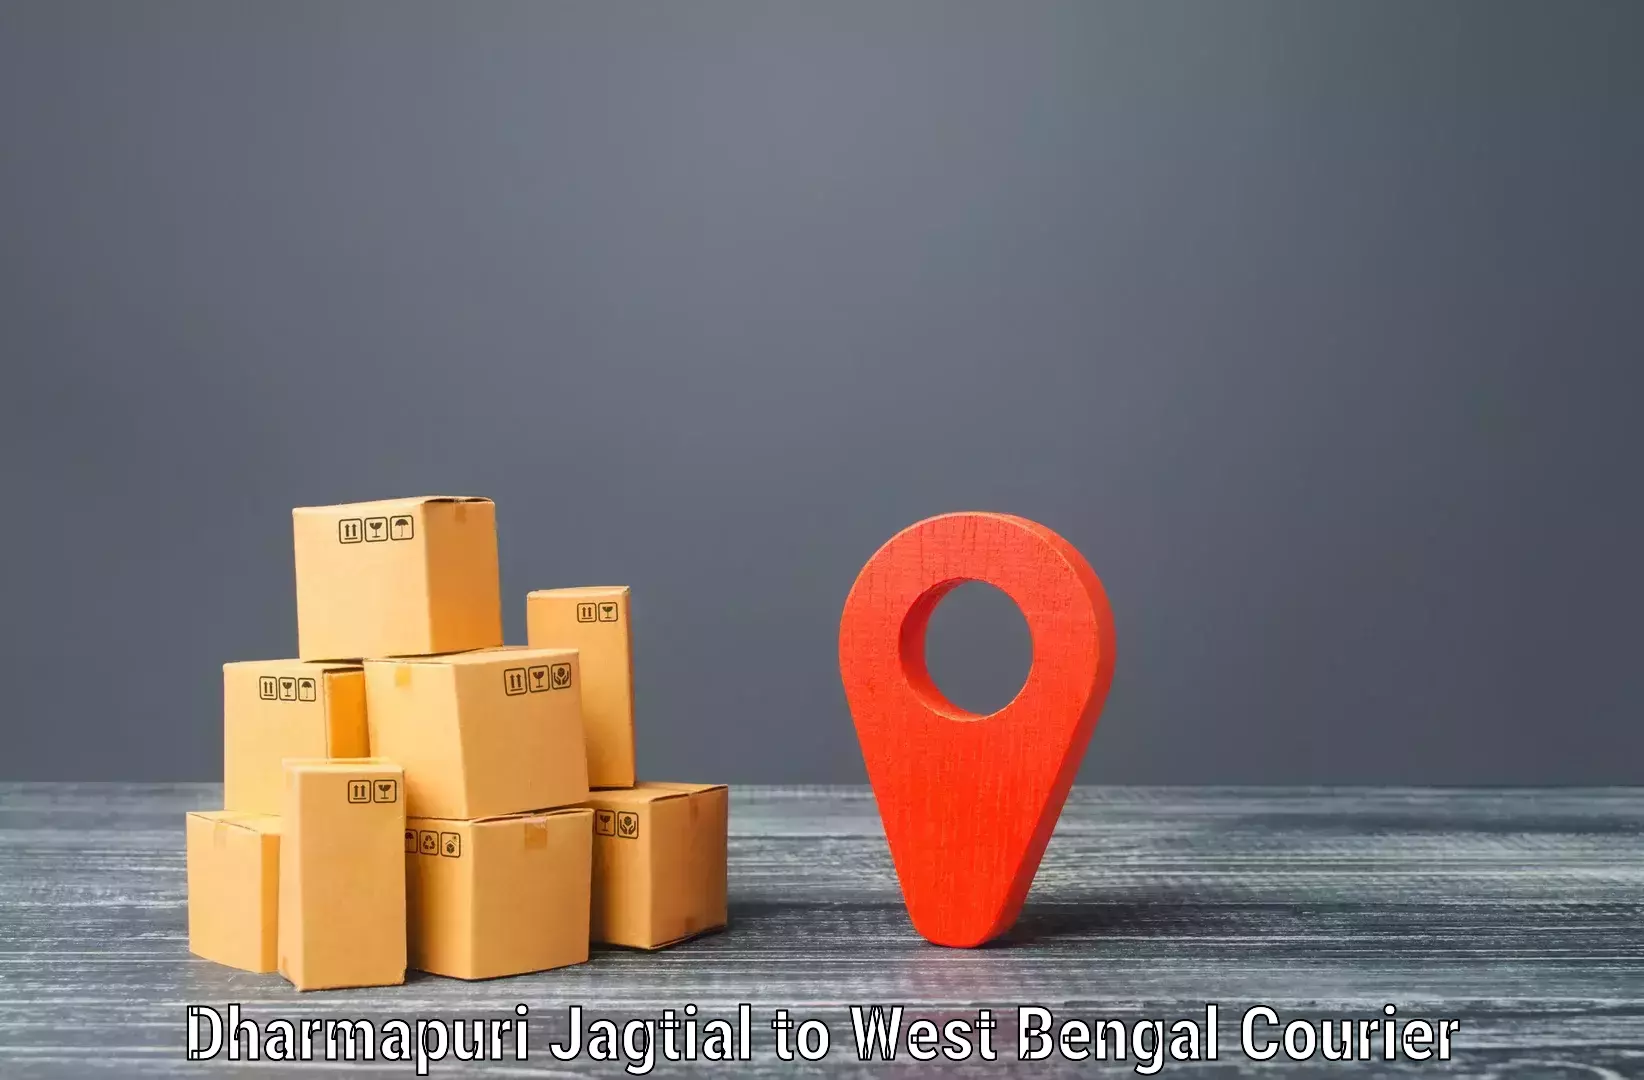 Multi-national courier services Dharmapuri Jagtial to Bardhaman